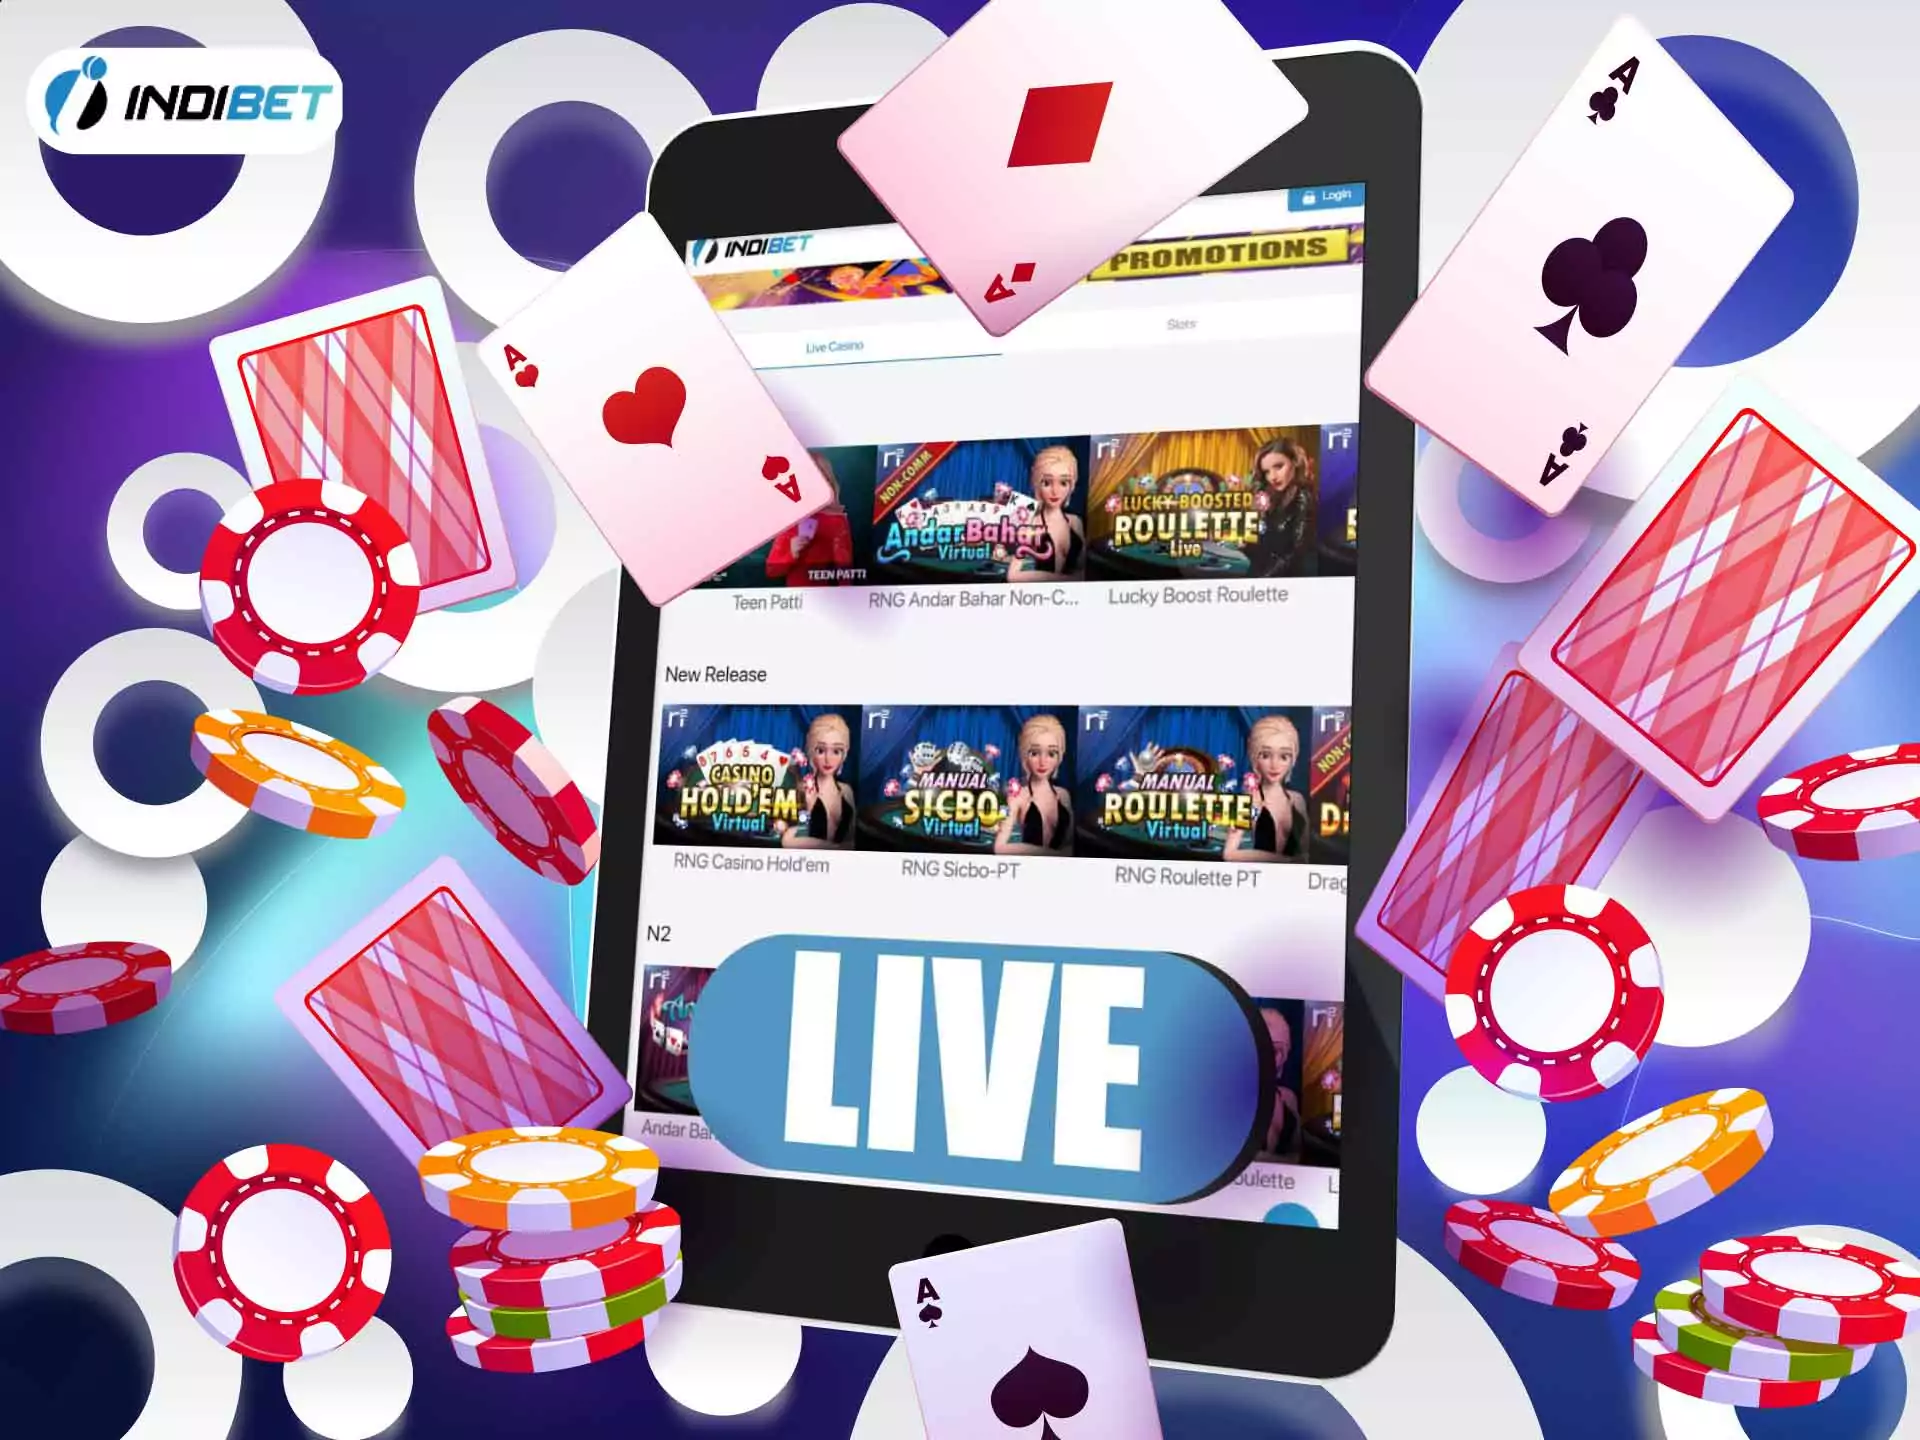 Play casino games against the real dealer and try to win at Indibet.